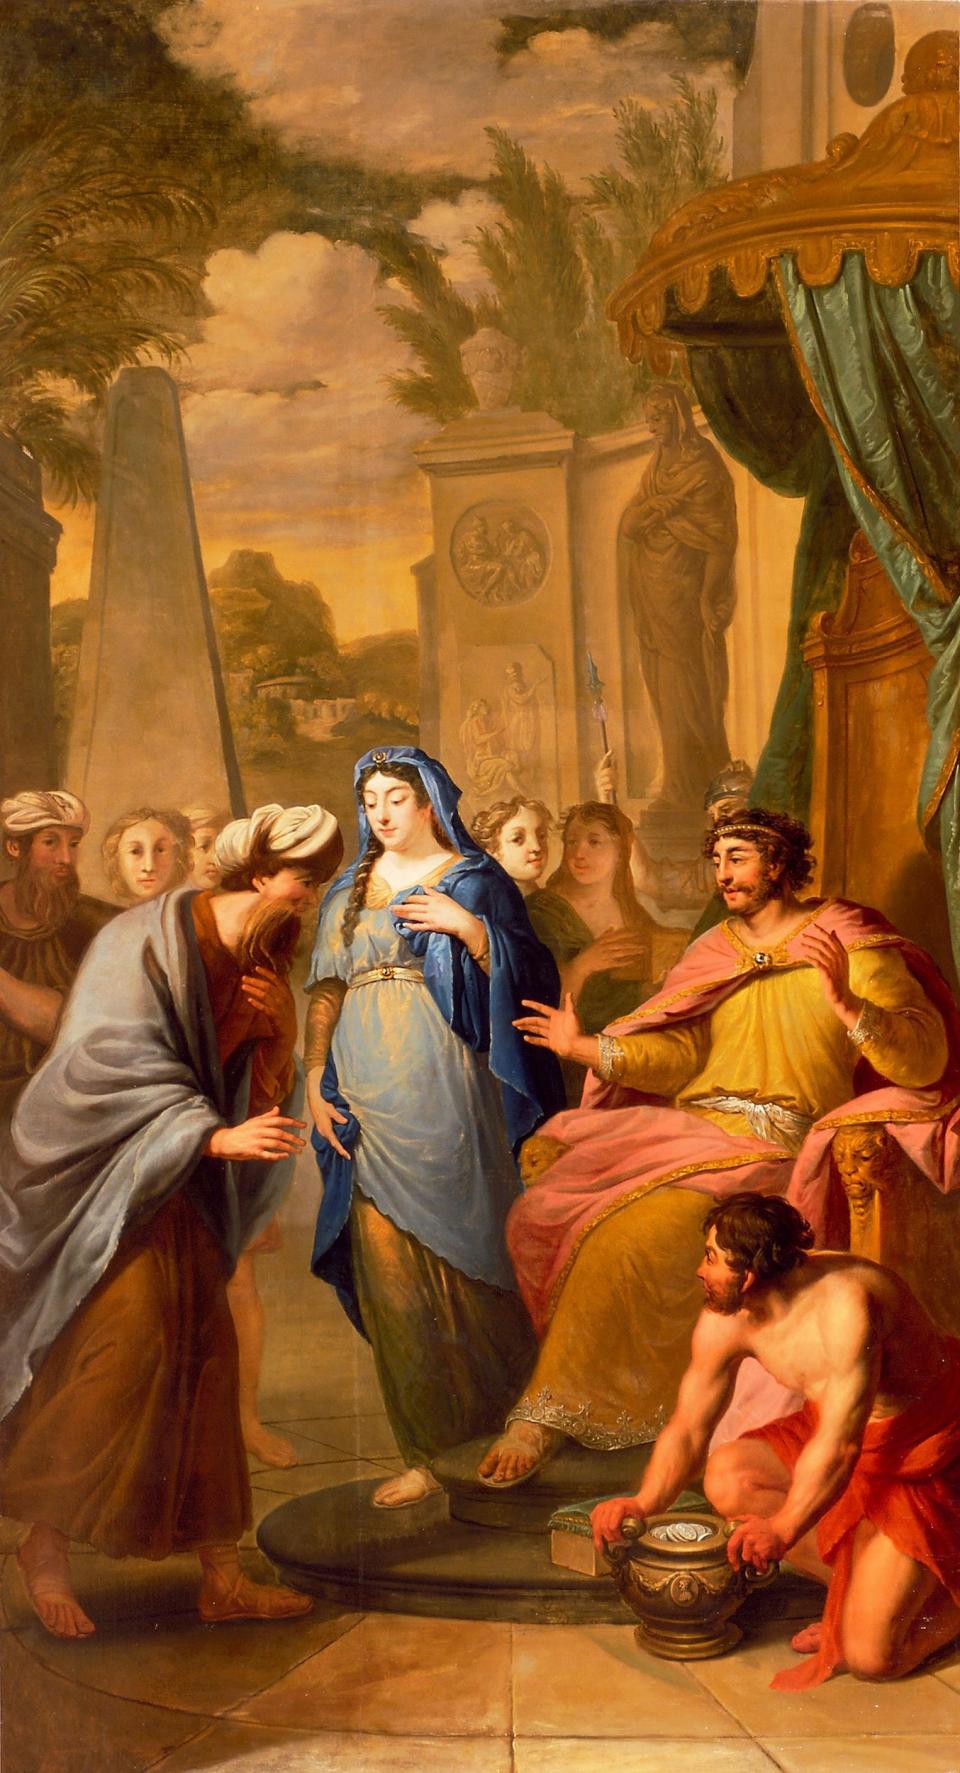 A painting by Elias Van Nijmegen of the Genesis scene featuring Abimelech returning Sarah to Abraham.